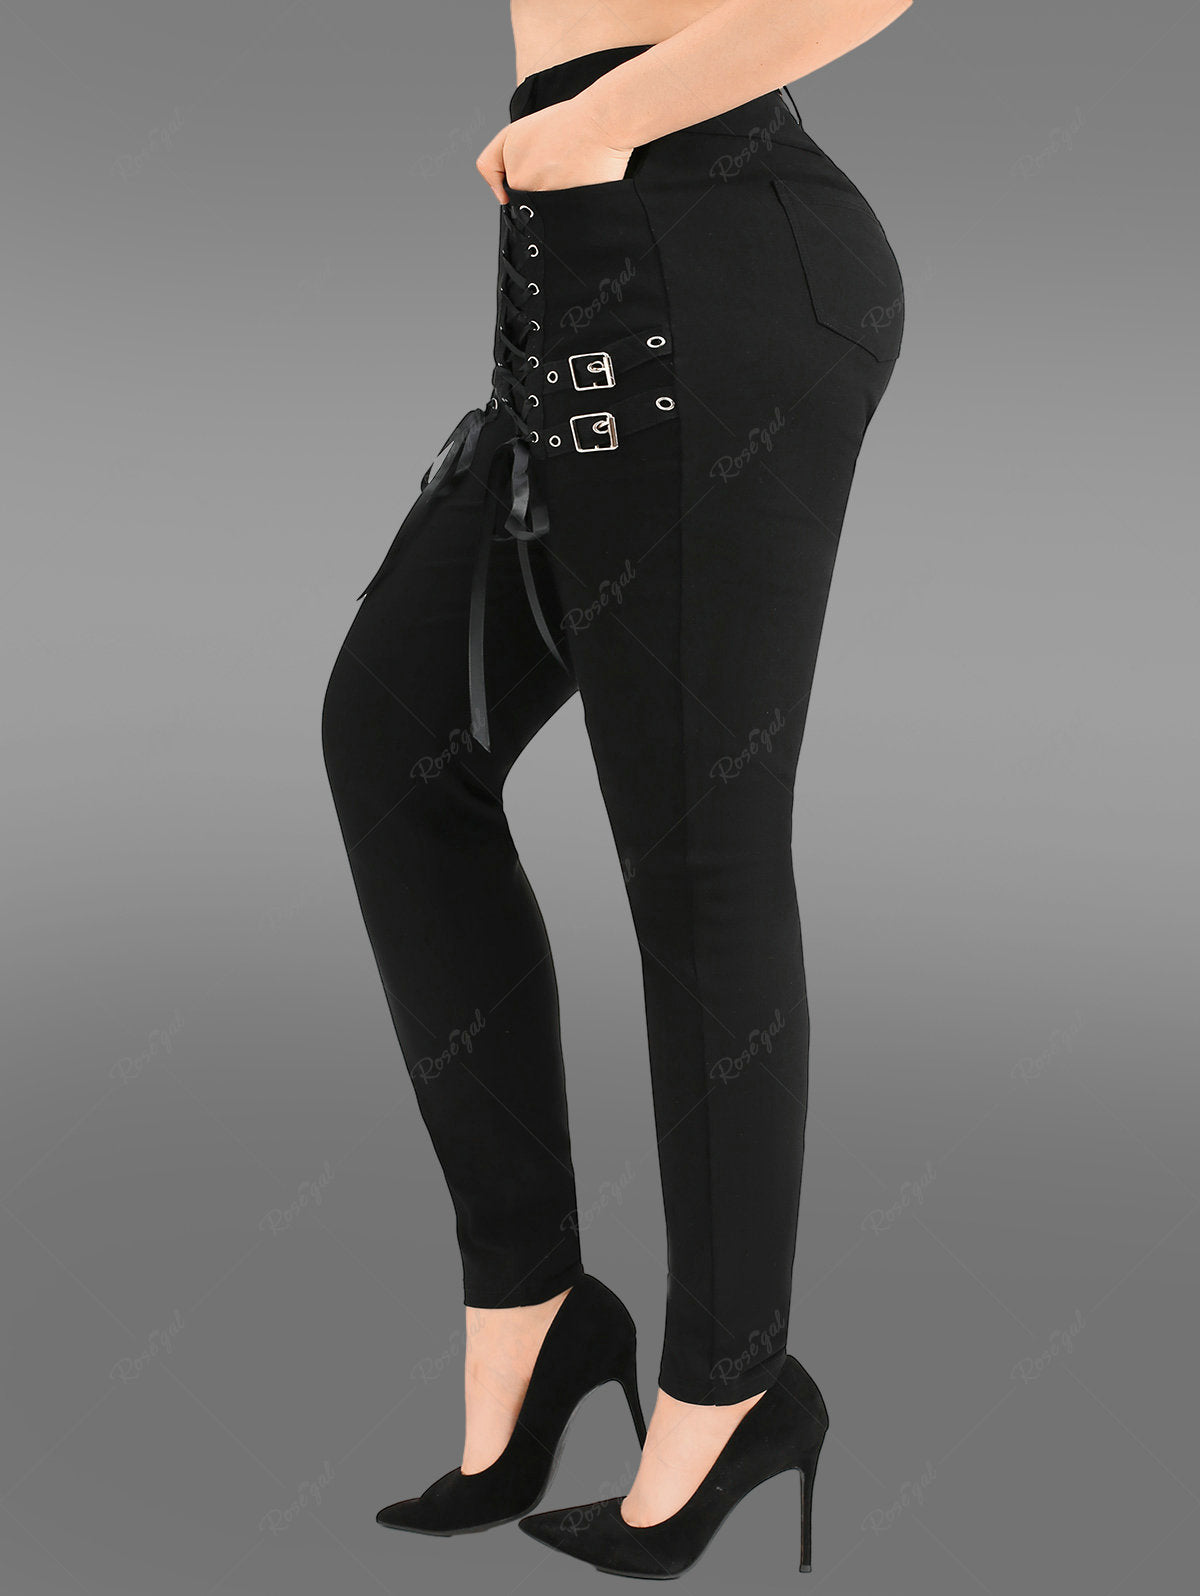 Gothic Lace Up Pockets Buckle Pull On Leggings